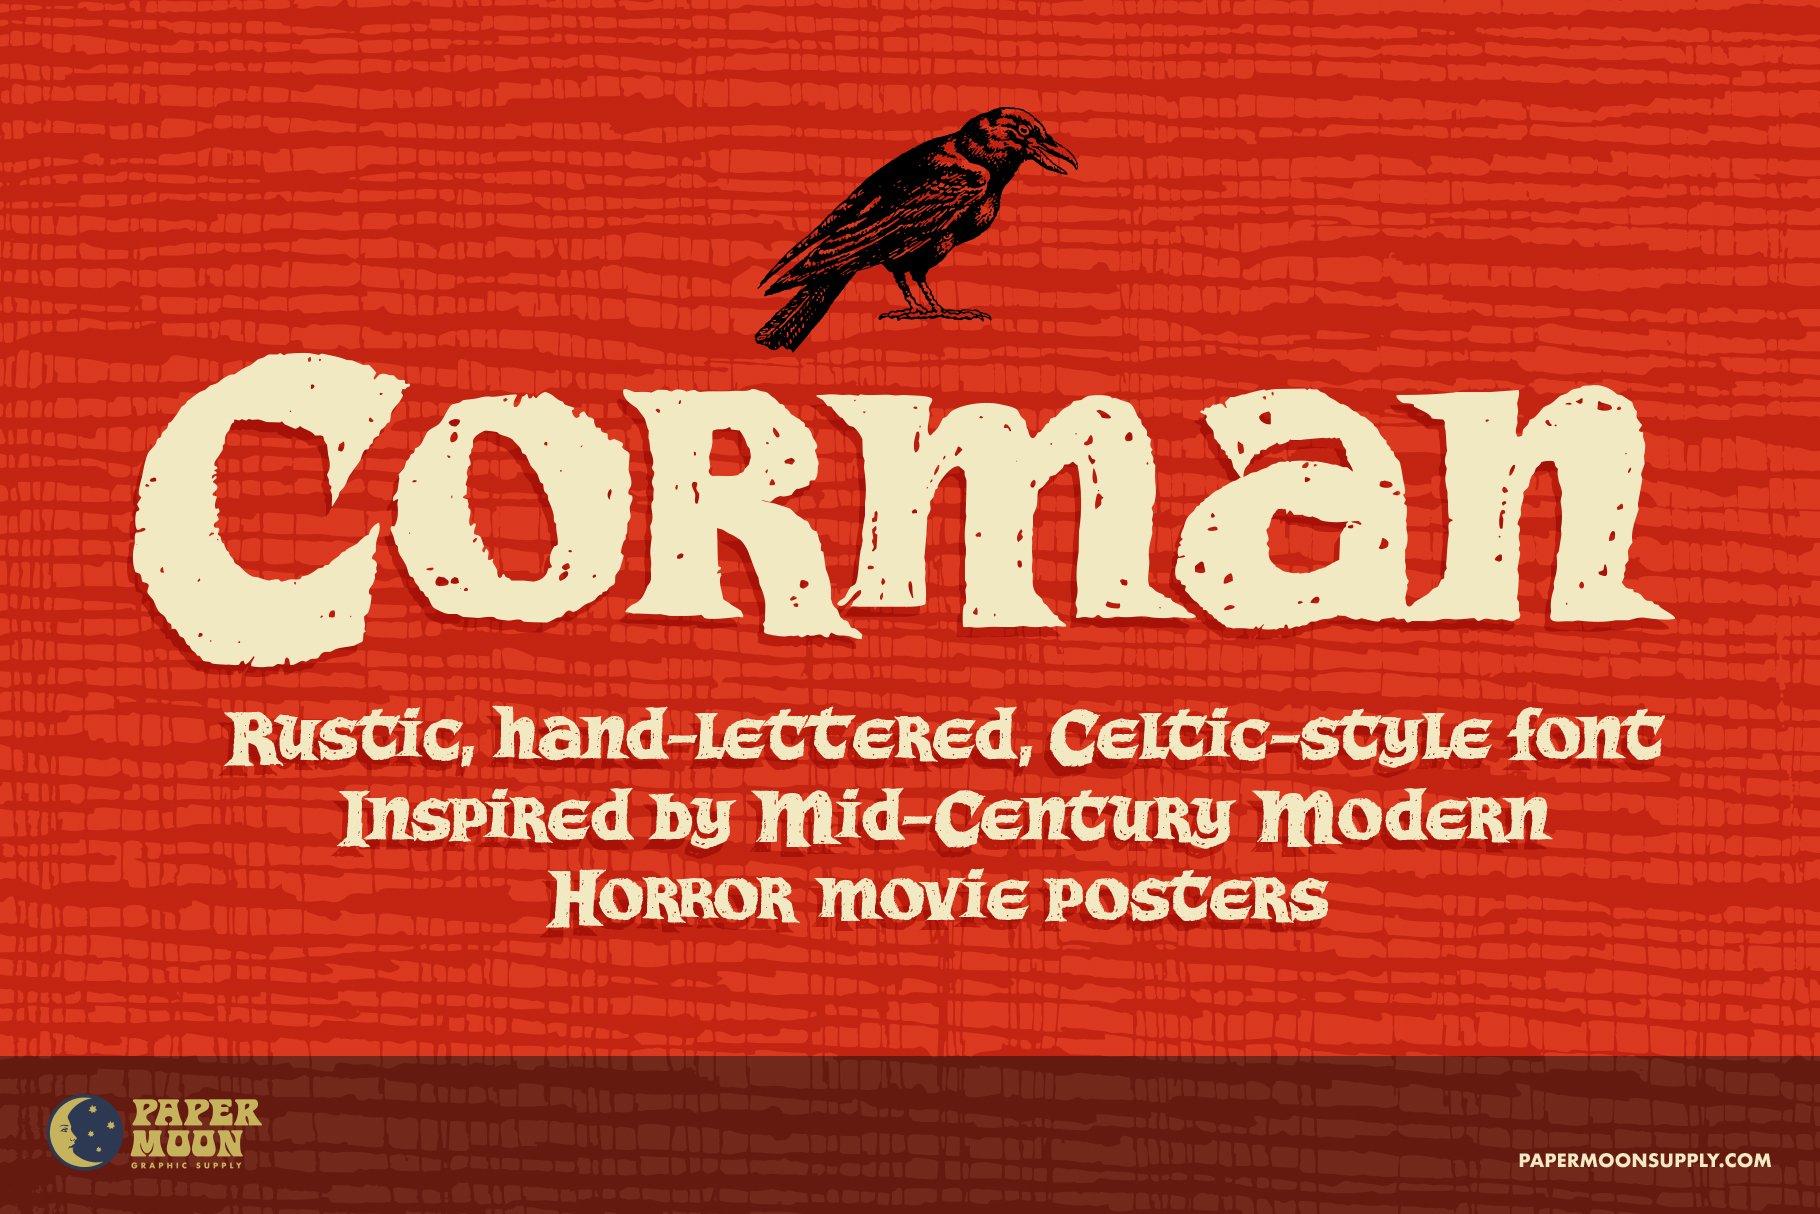 Corman Hand Drawn Celtic Font cover image.